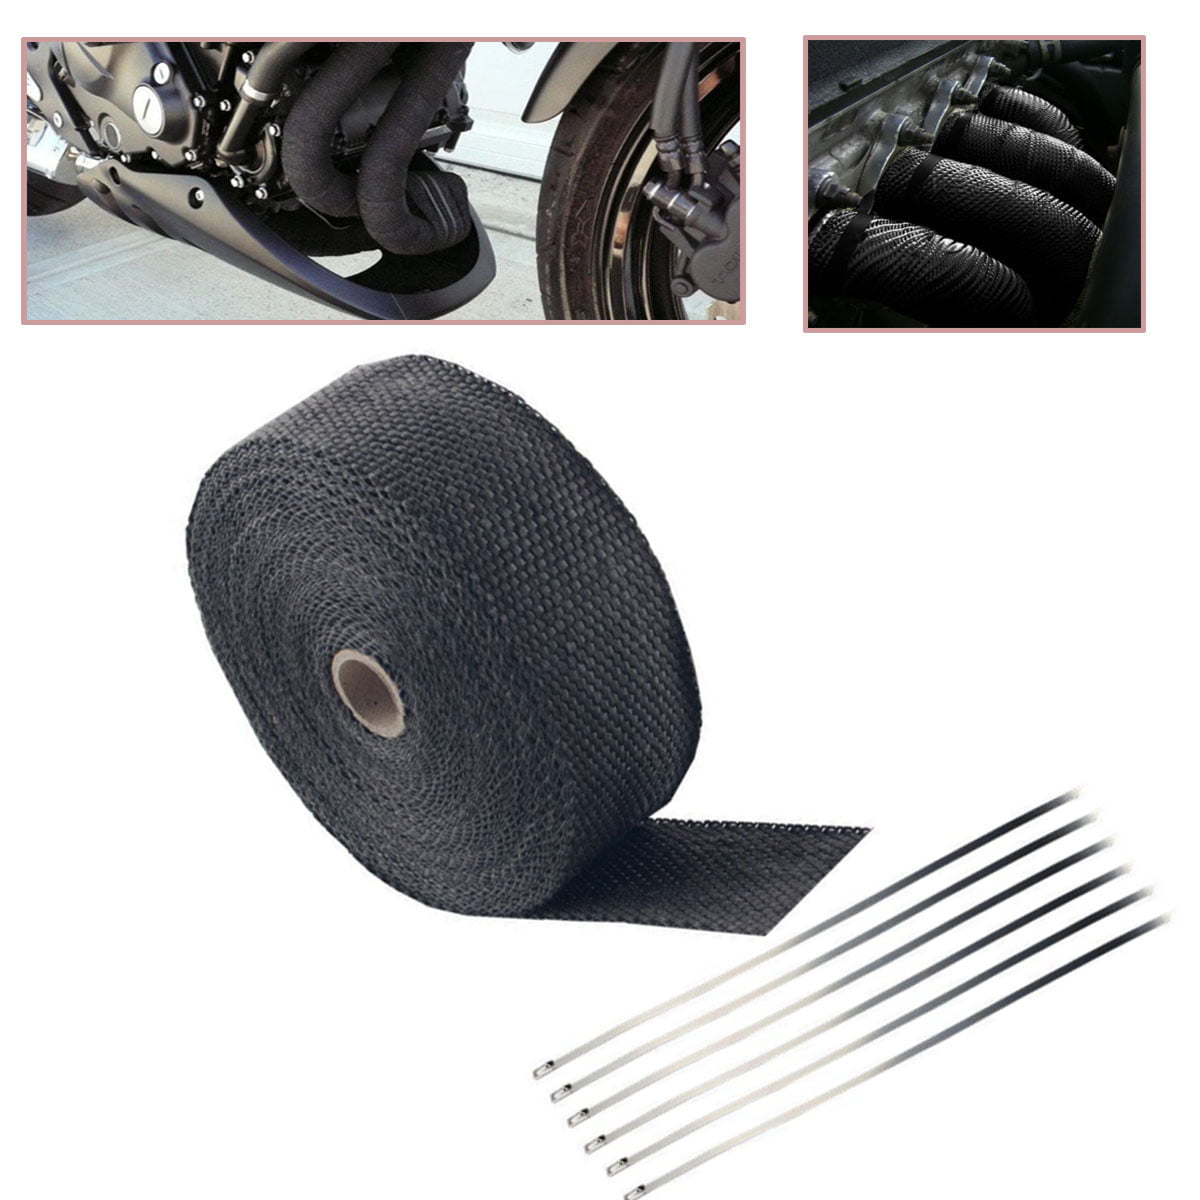 Manifold Downpipe Motorbike Accessory 10m X 50mm Exhaust Heat Pipe Wrap for Vintage Cars for ATVs Exhaust Heat Wrap Cable